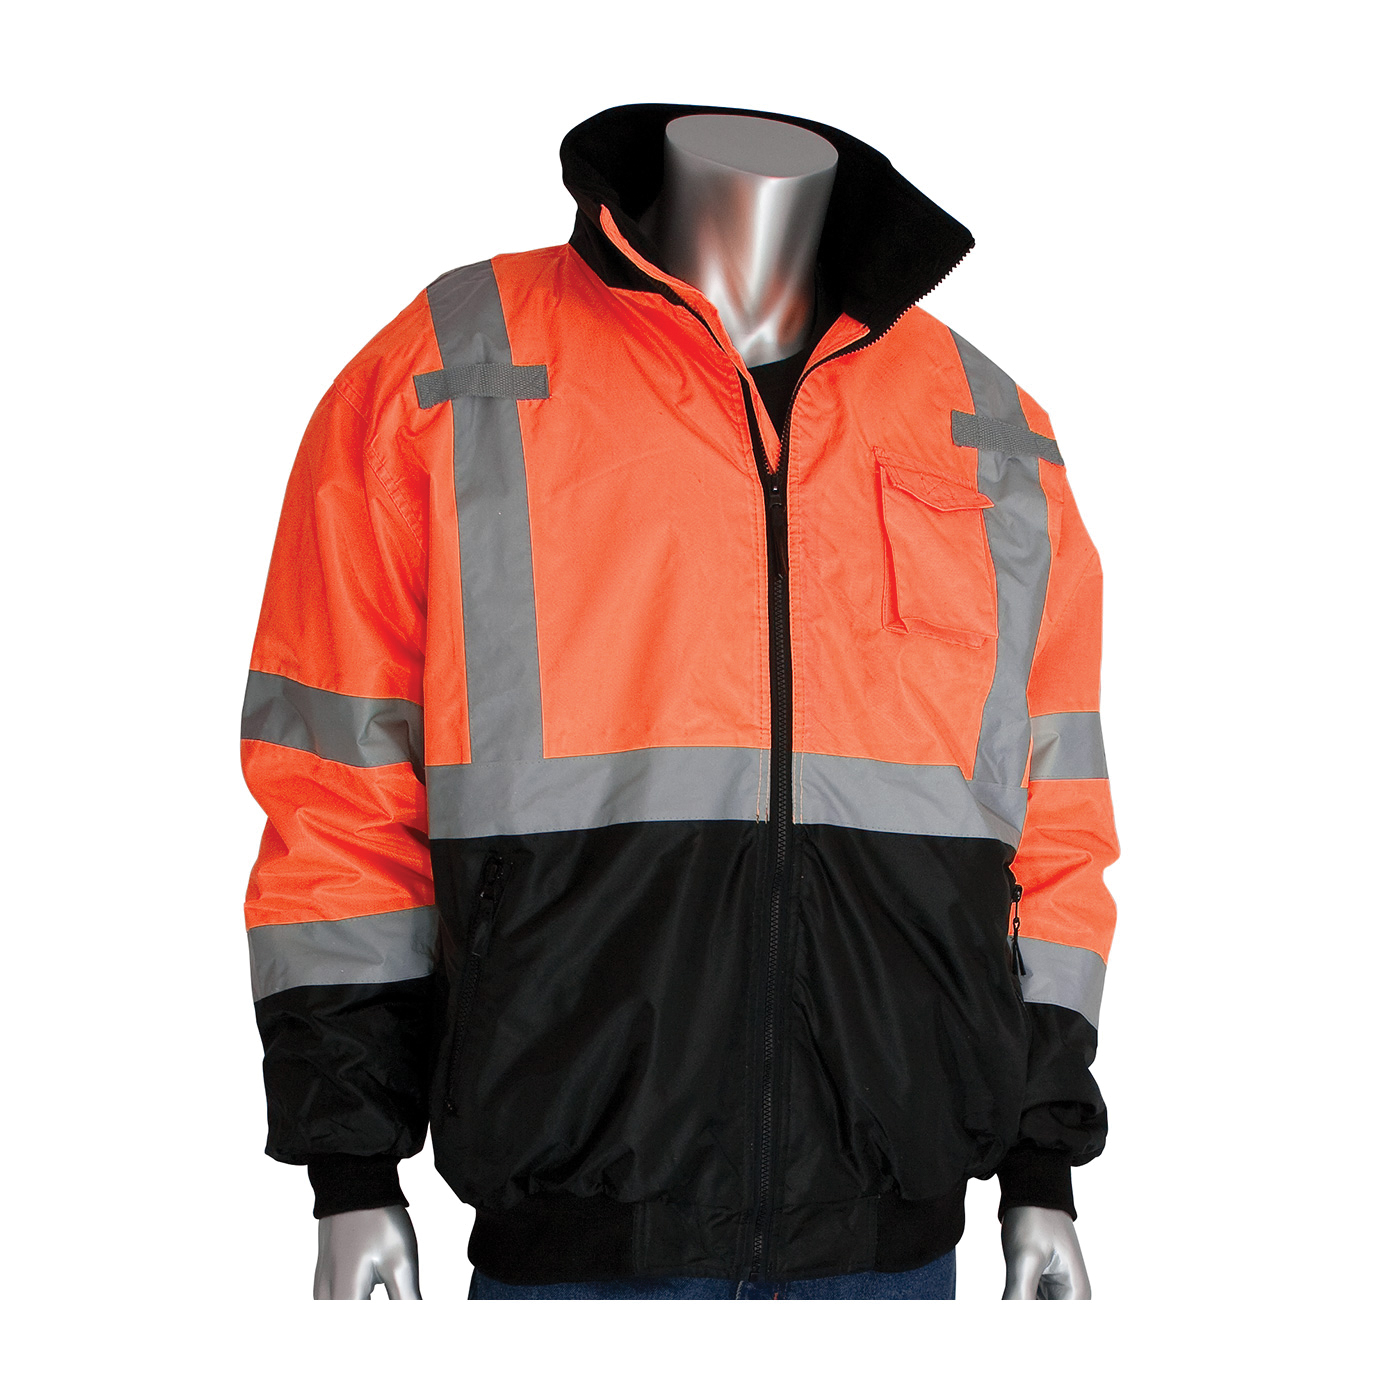 PIP® 333-1766-OR/M Bomber Jacket With Zip-Out Fleece Liner, Hi-Viz Orange, Polyester, 54 in Chest, Resists: Water, Specifications Met: ANSI 107 Class 3 Type R